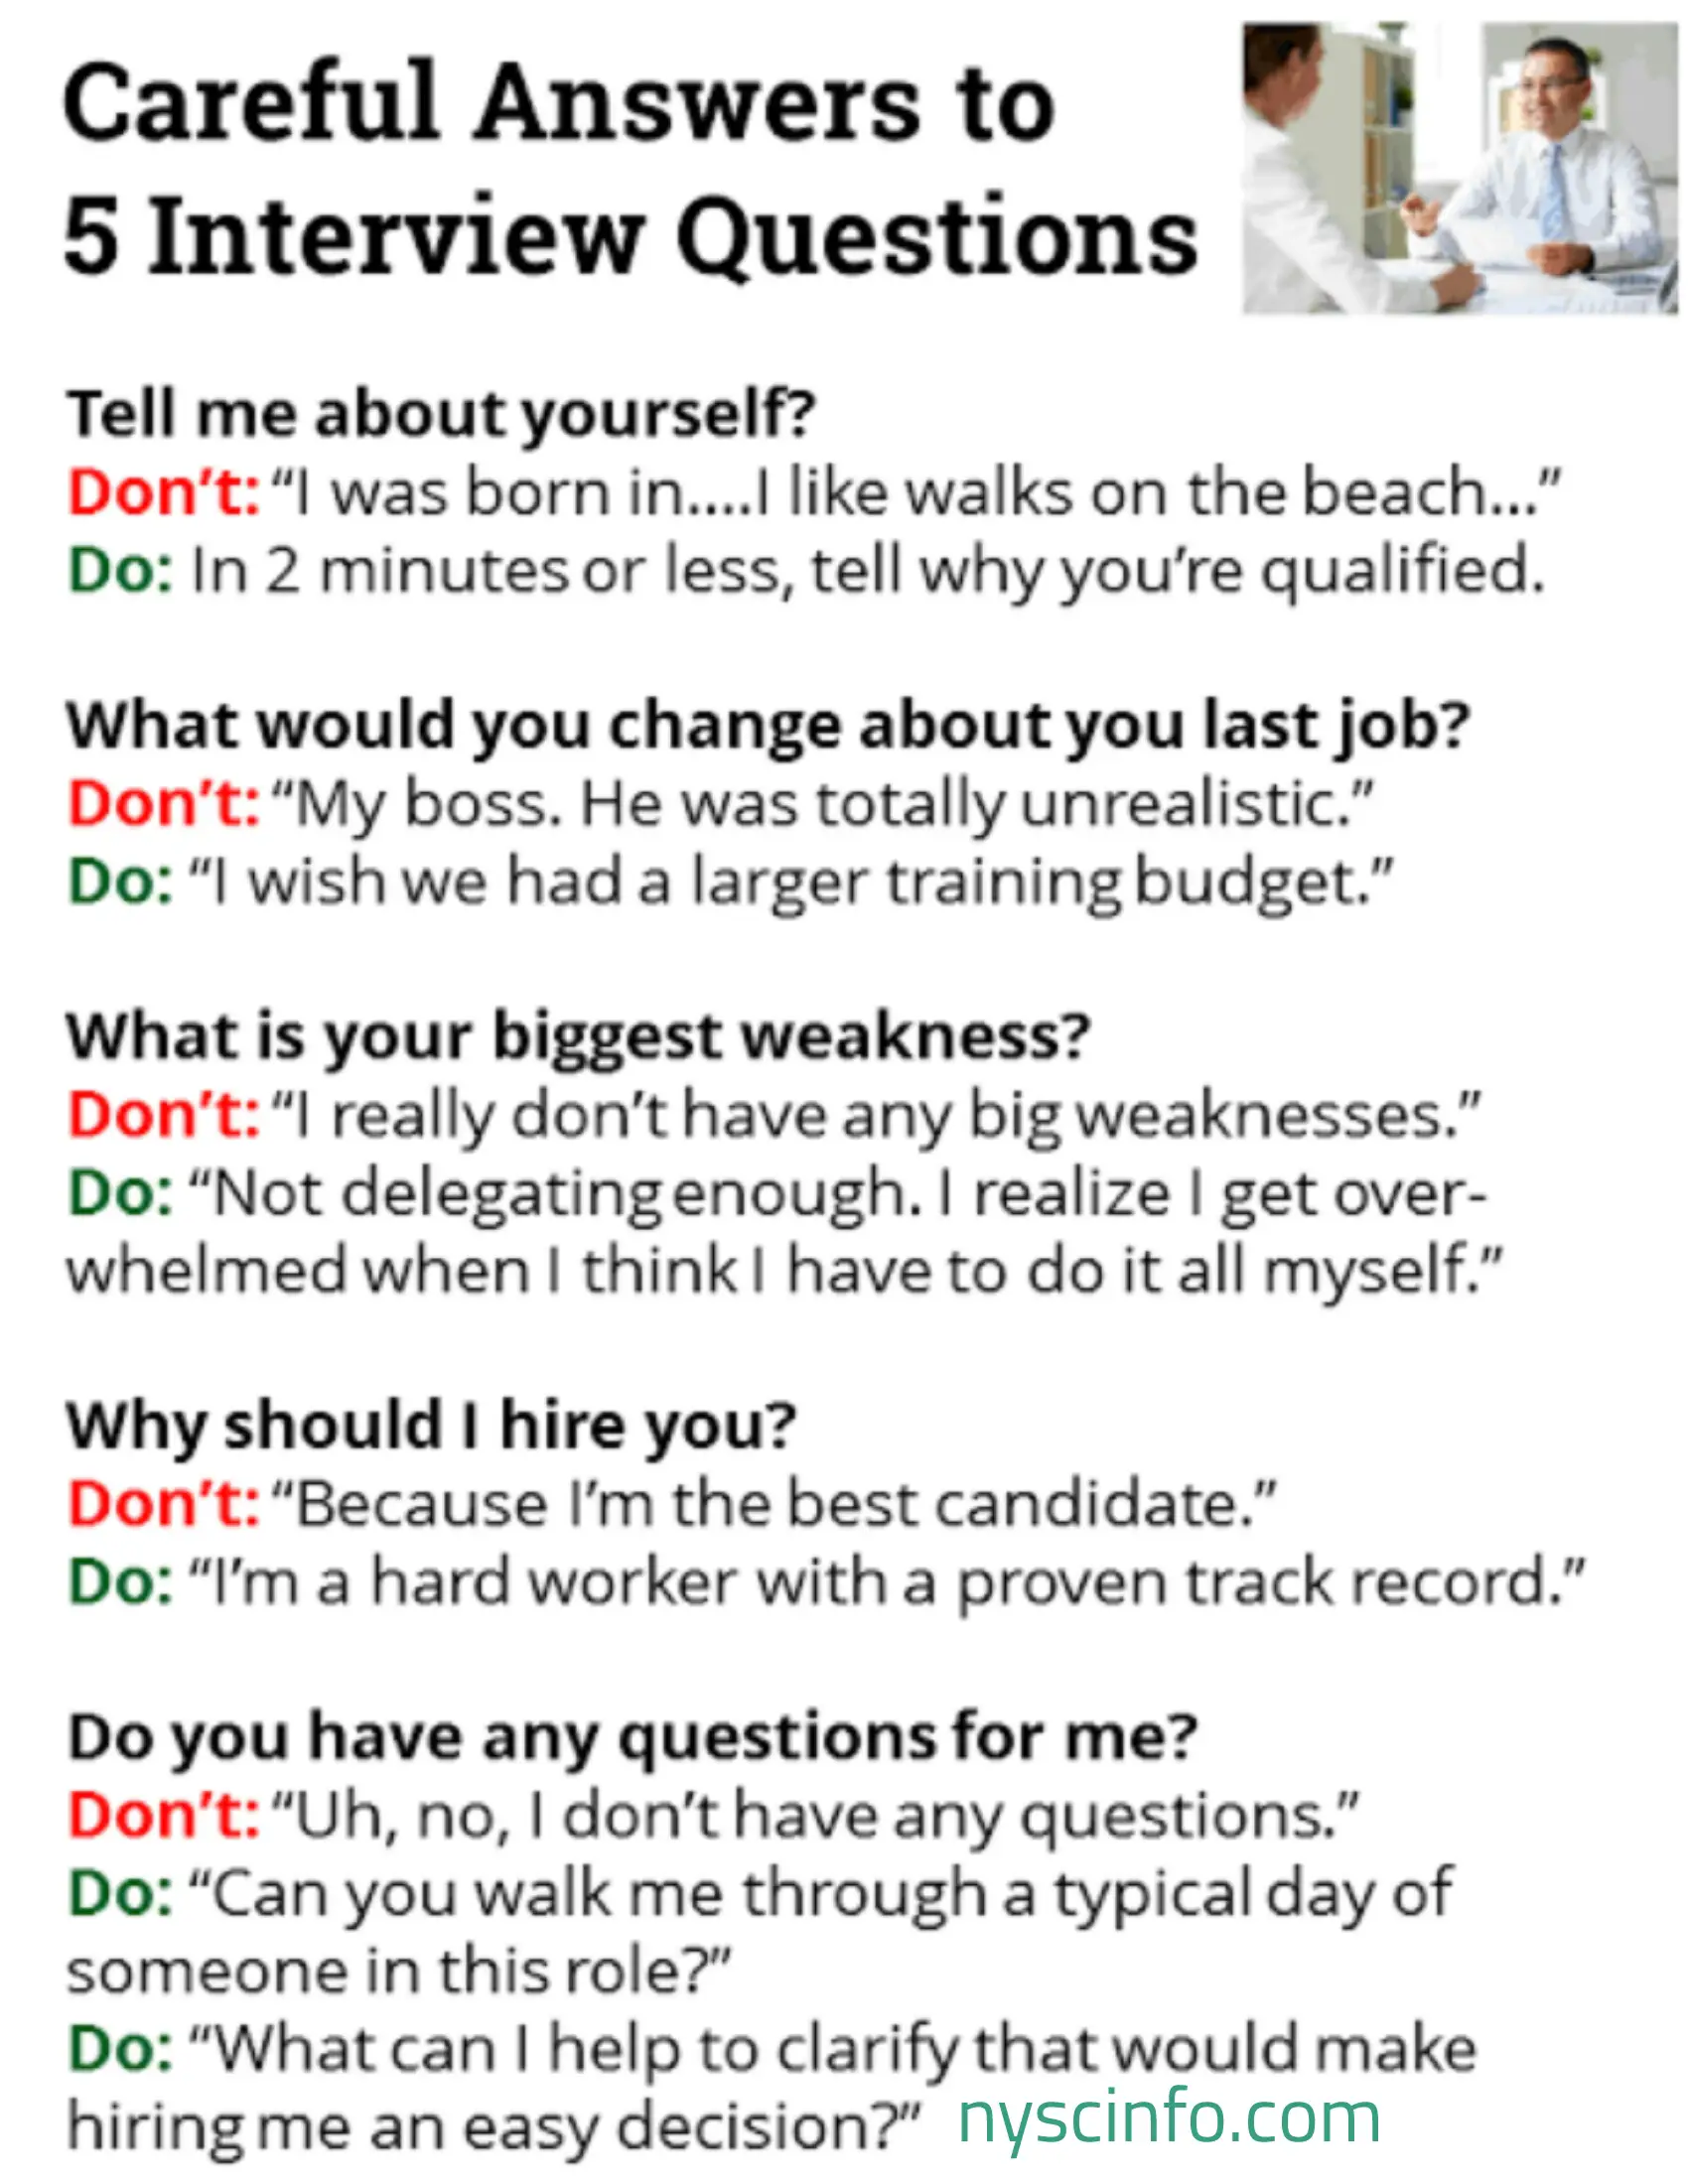 10 Tough Job Interview Questions and Answers  Nyscinfo.com